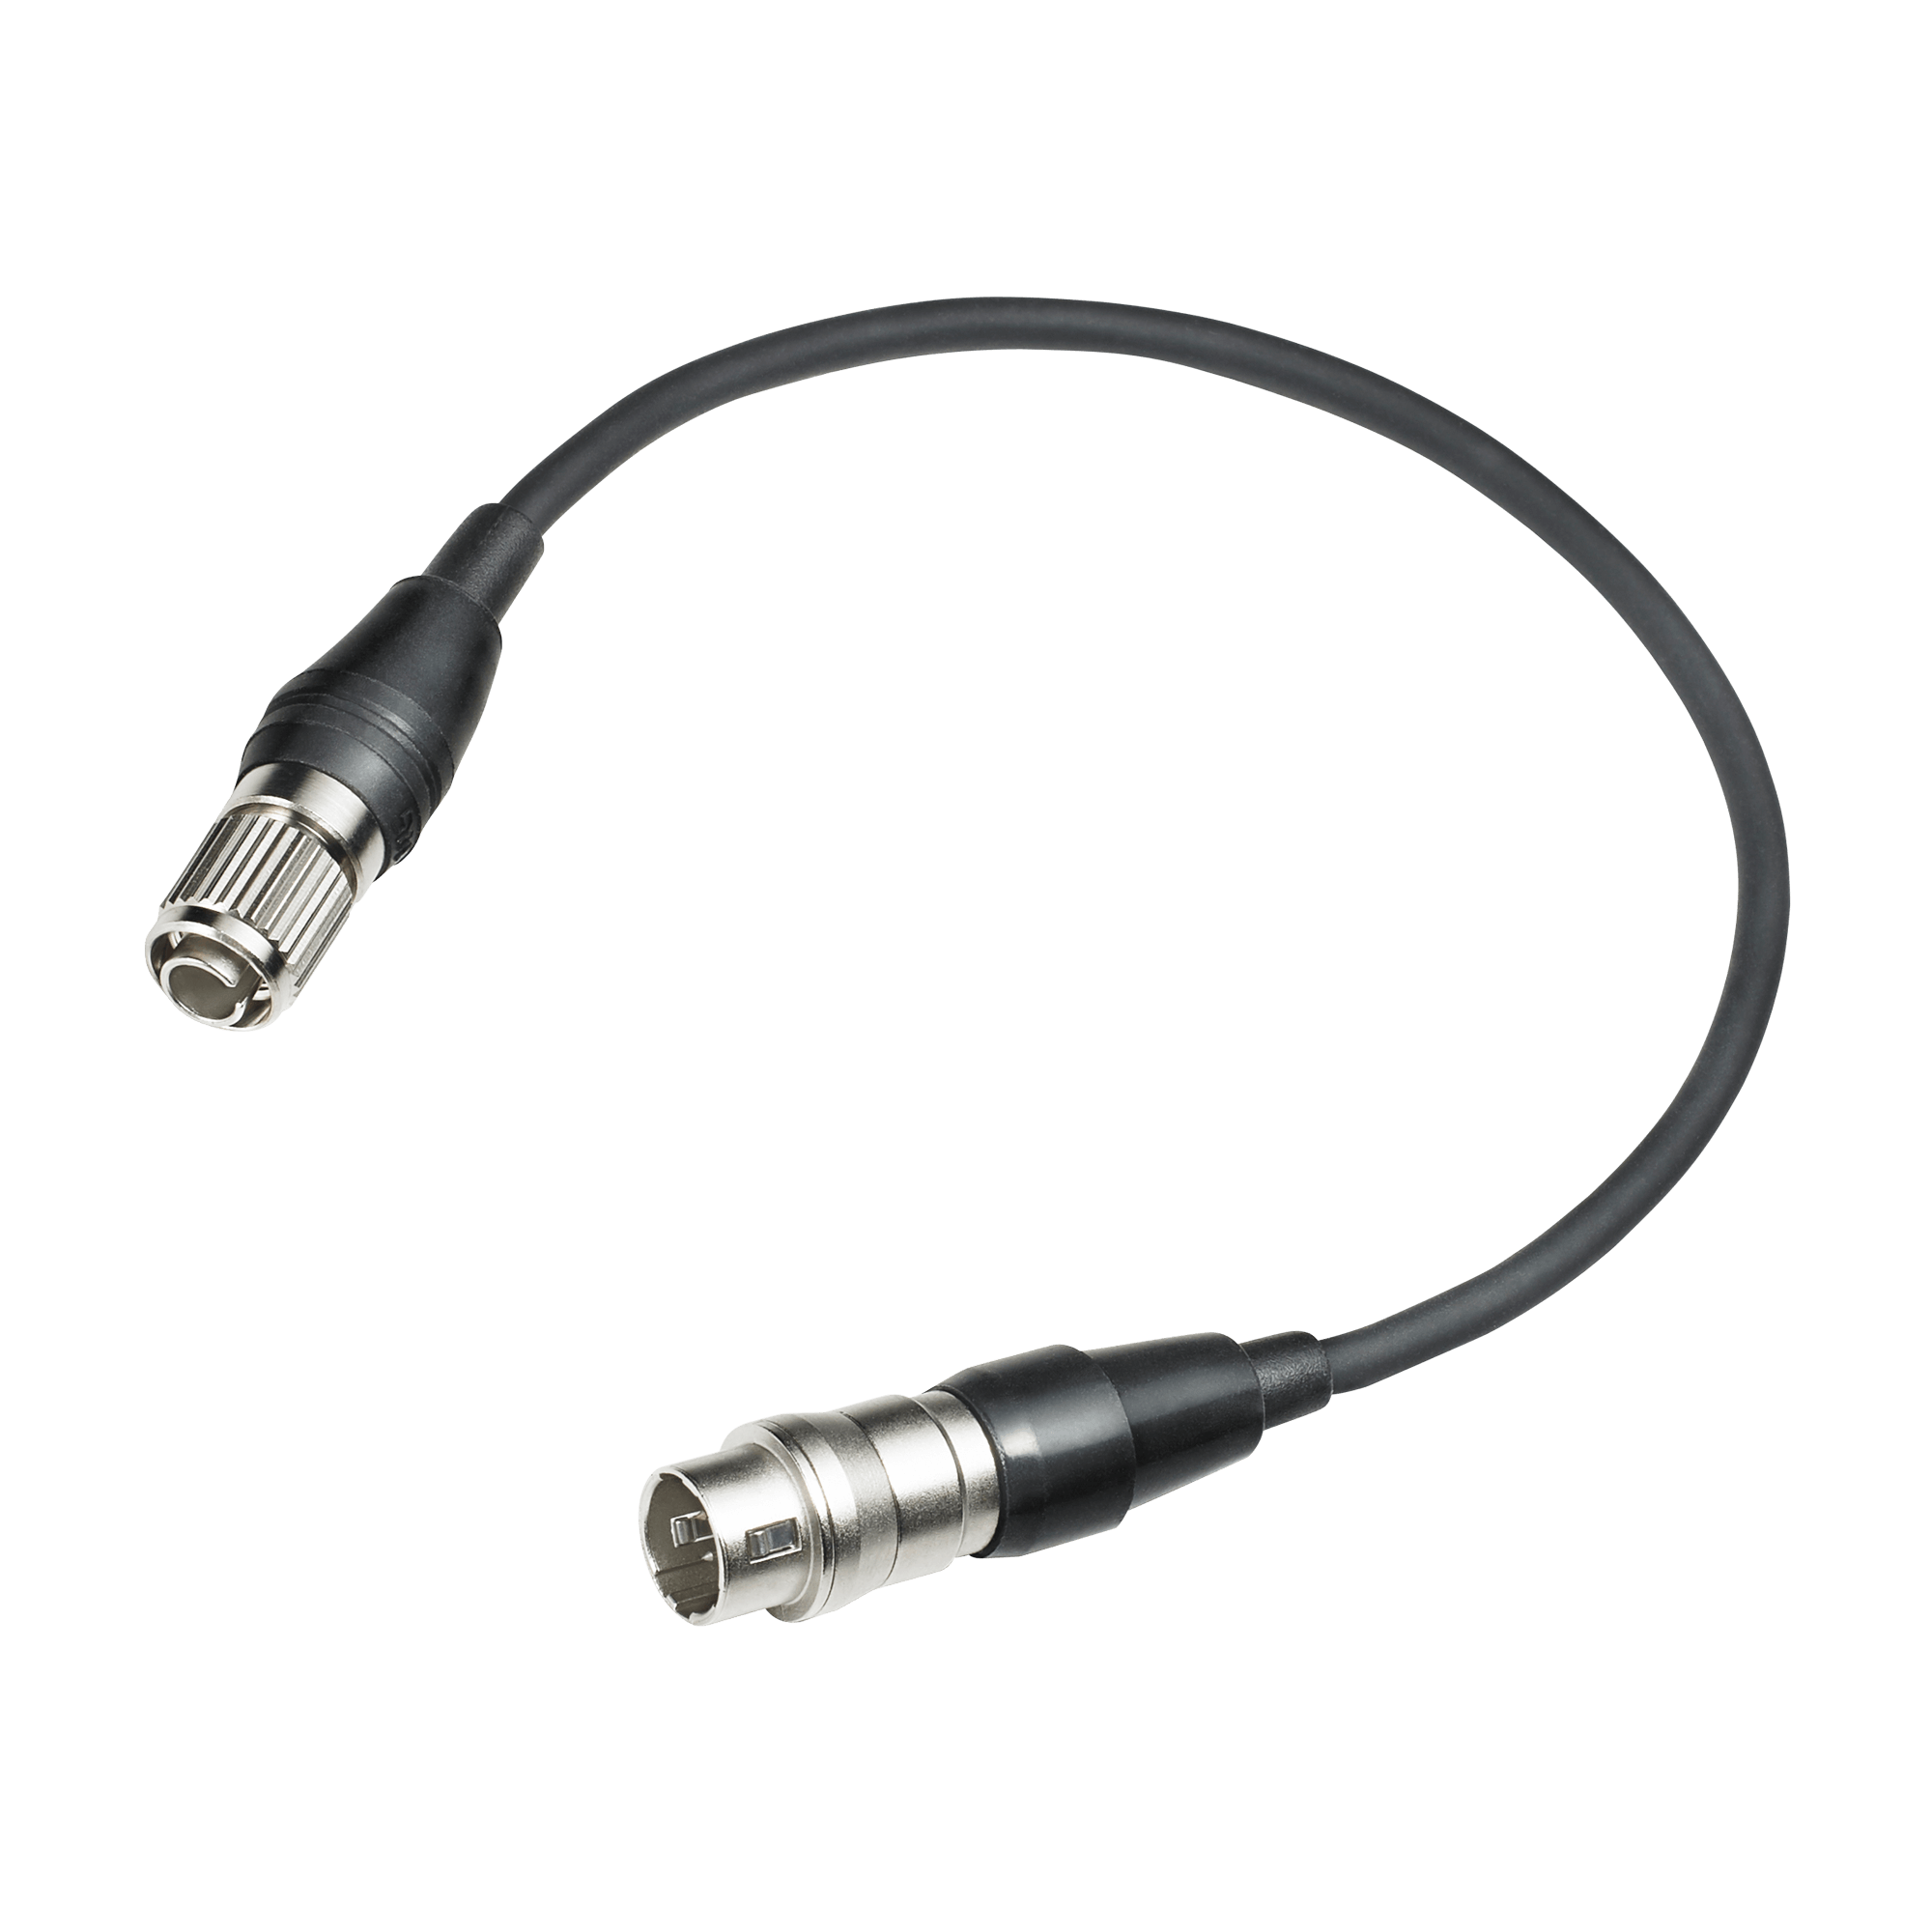 used with AT Beltpacks 7625867999521 Audio-Technica Audio Technica 4 Pole HRS Connector SolderTerminals 